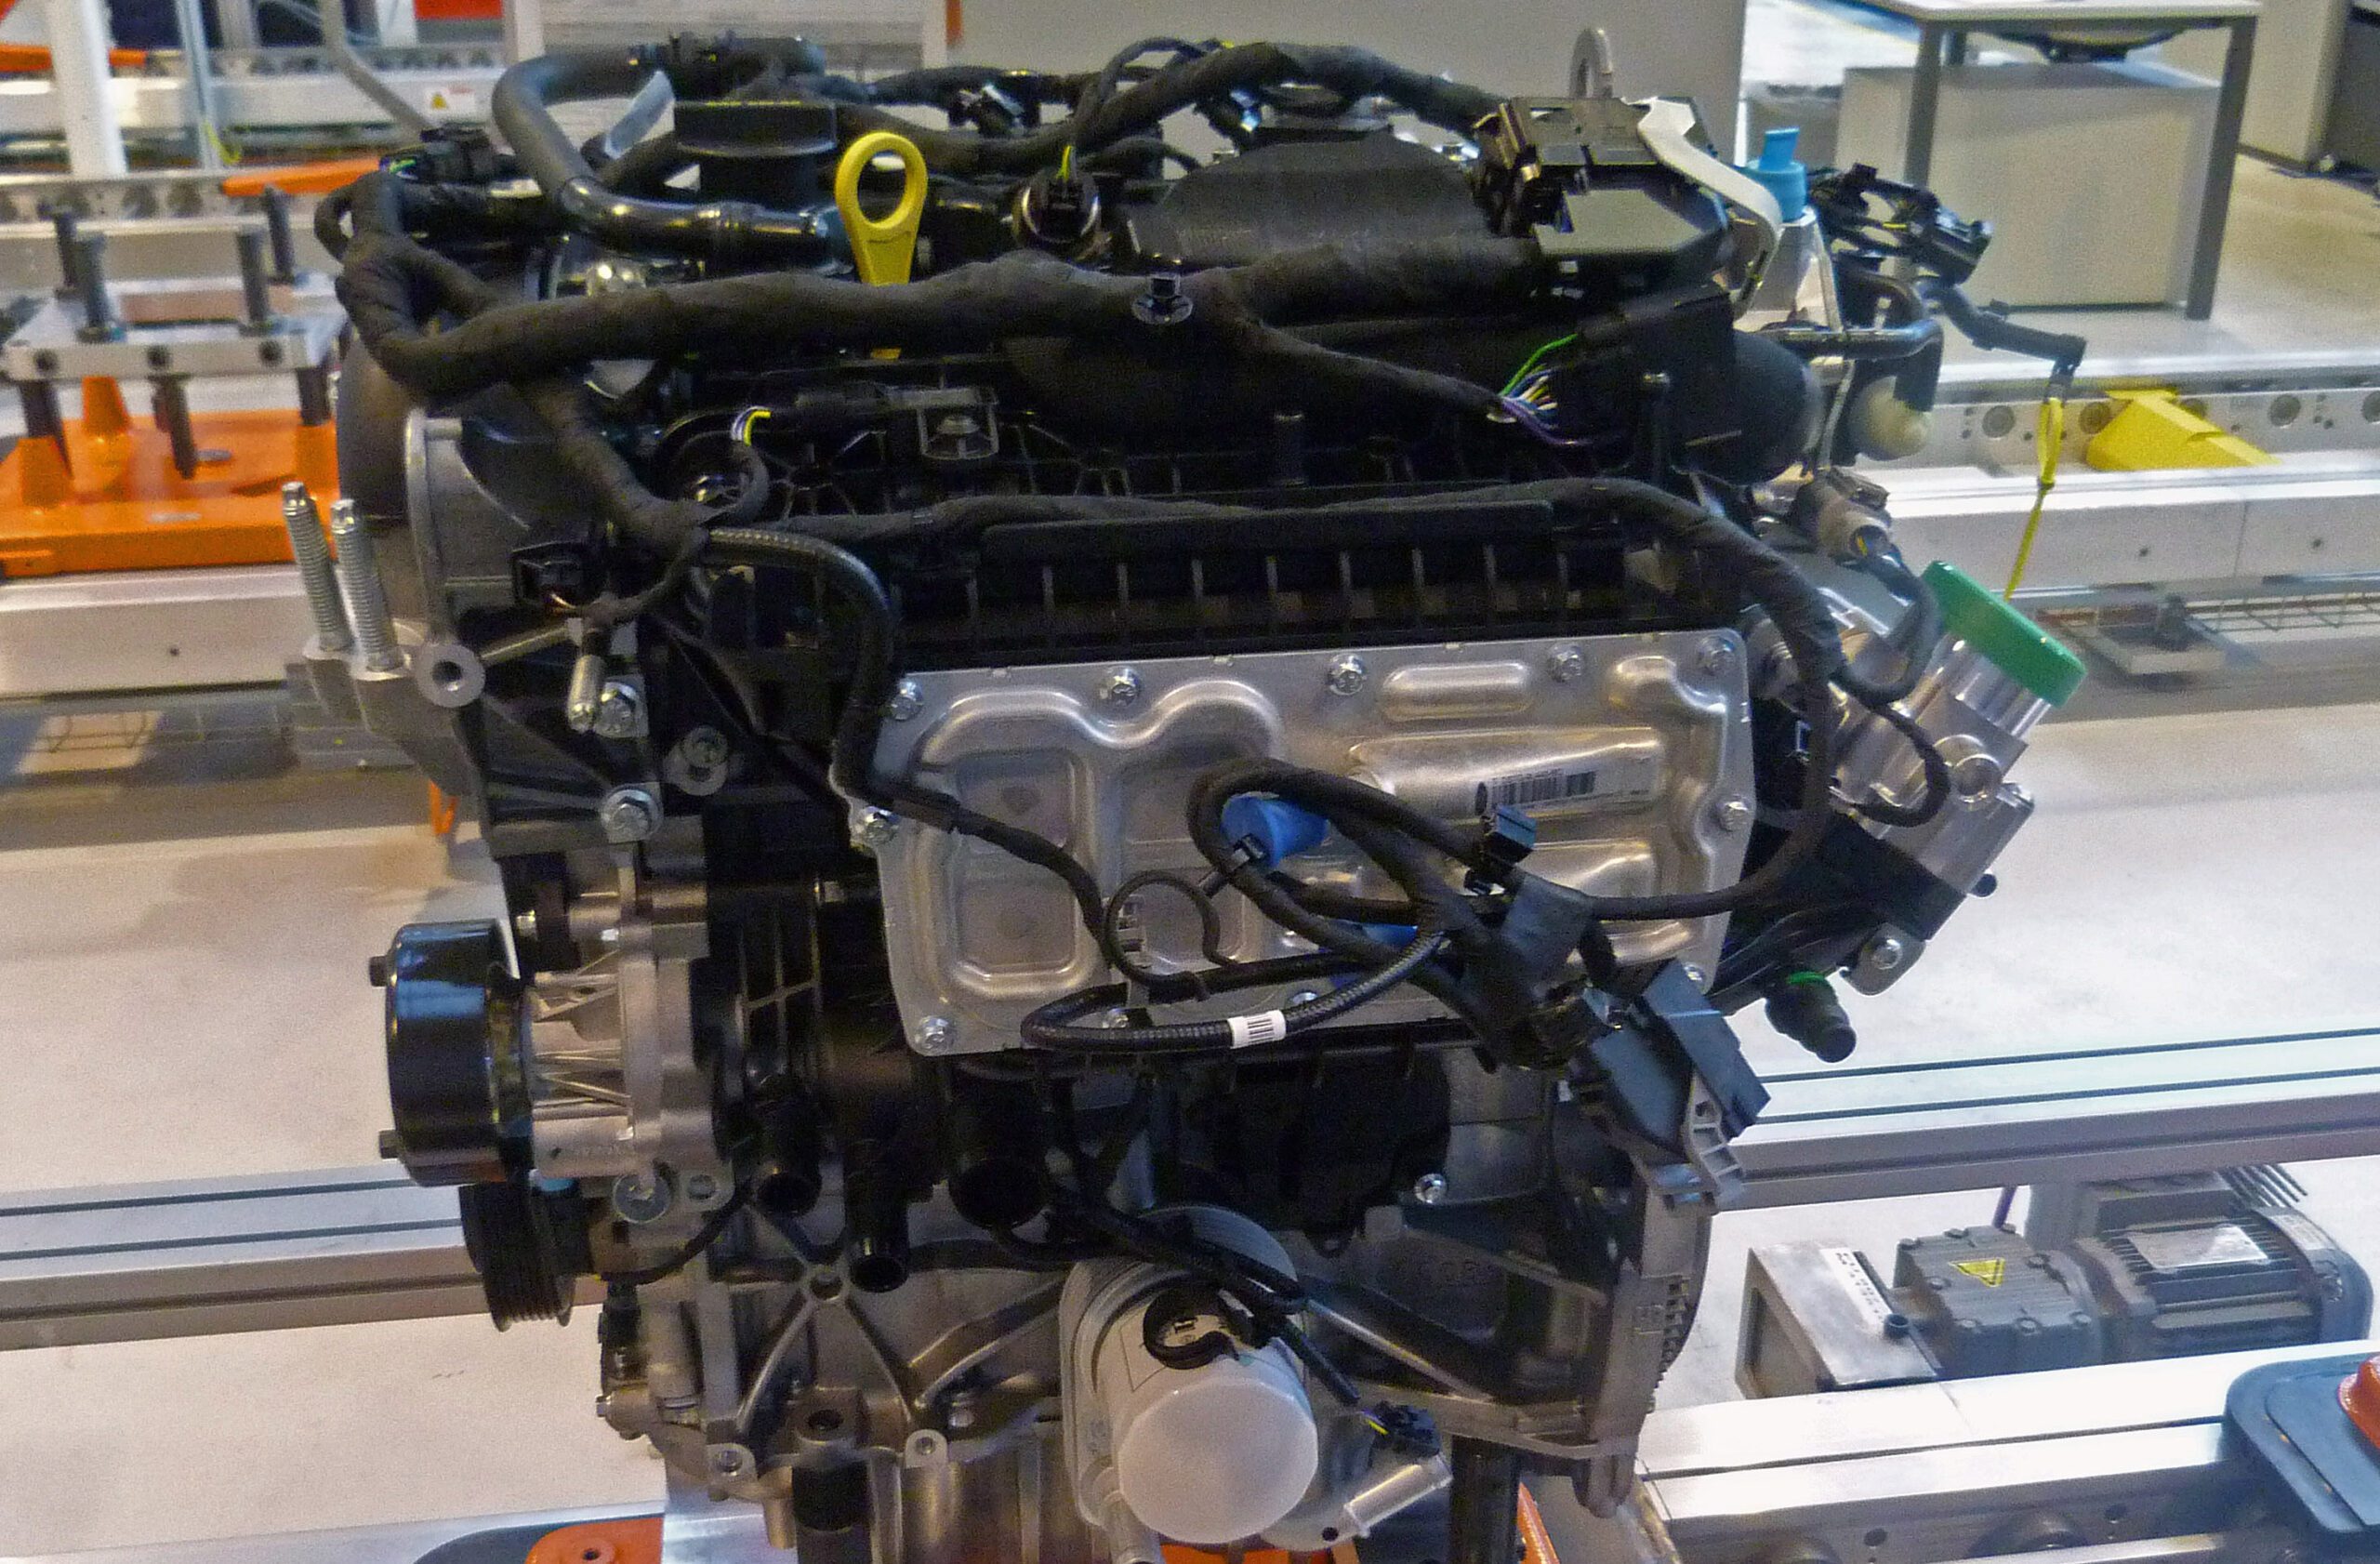 DTS Lopik revisie-specialist Ford 1.5 EcoBoost motor